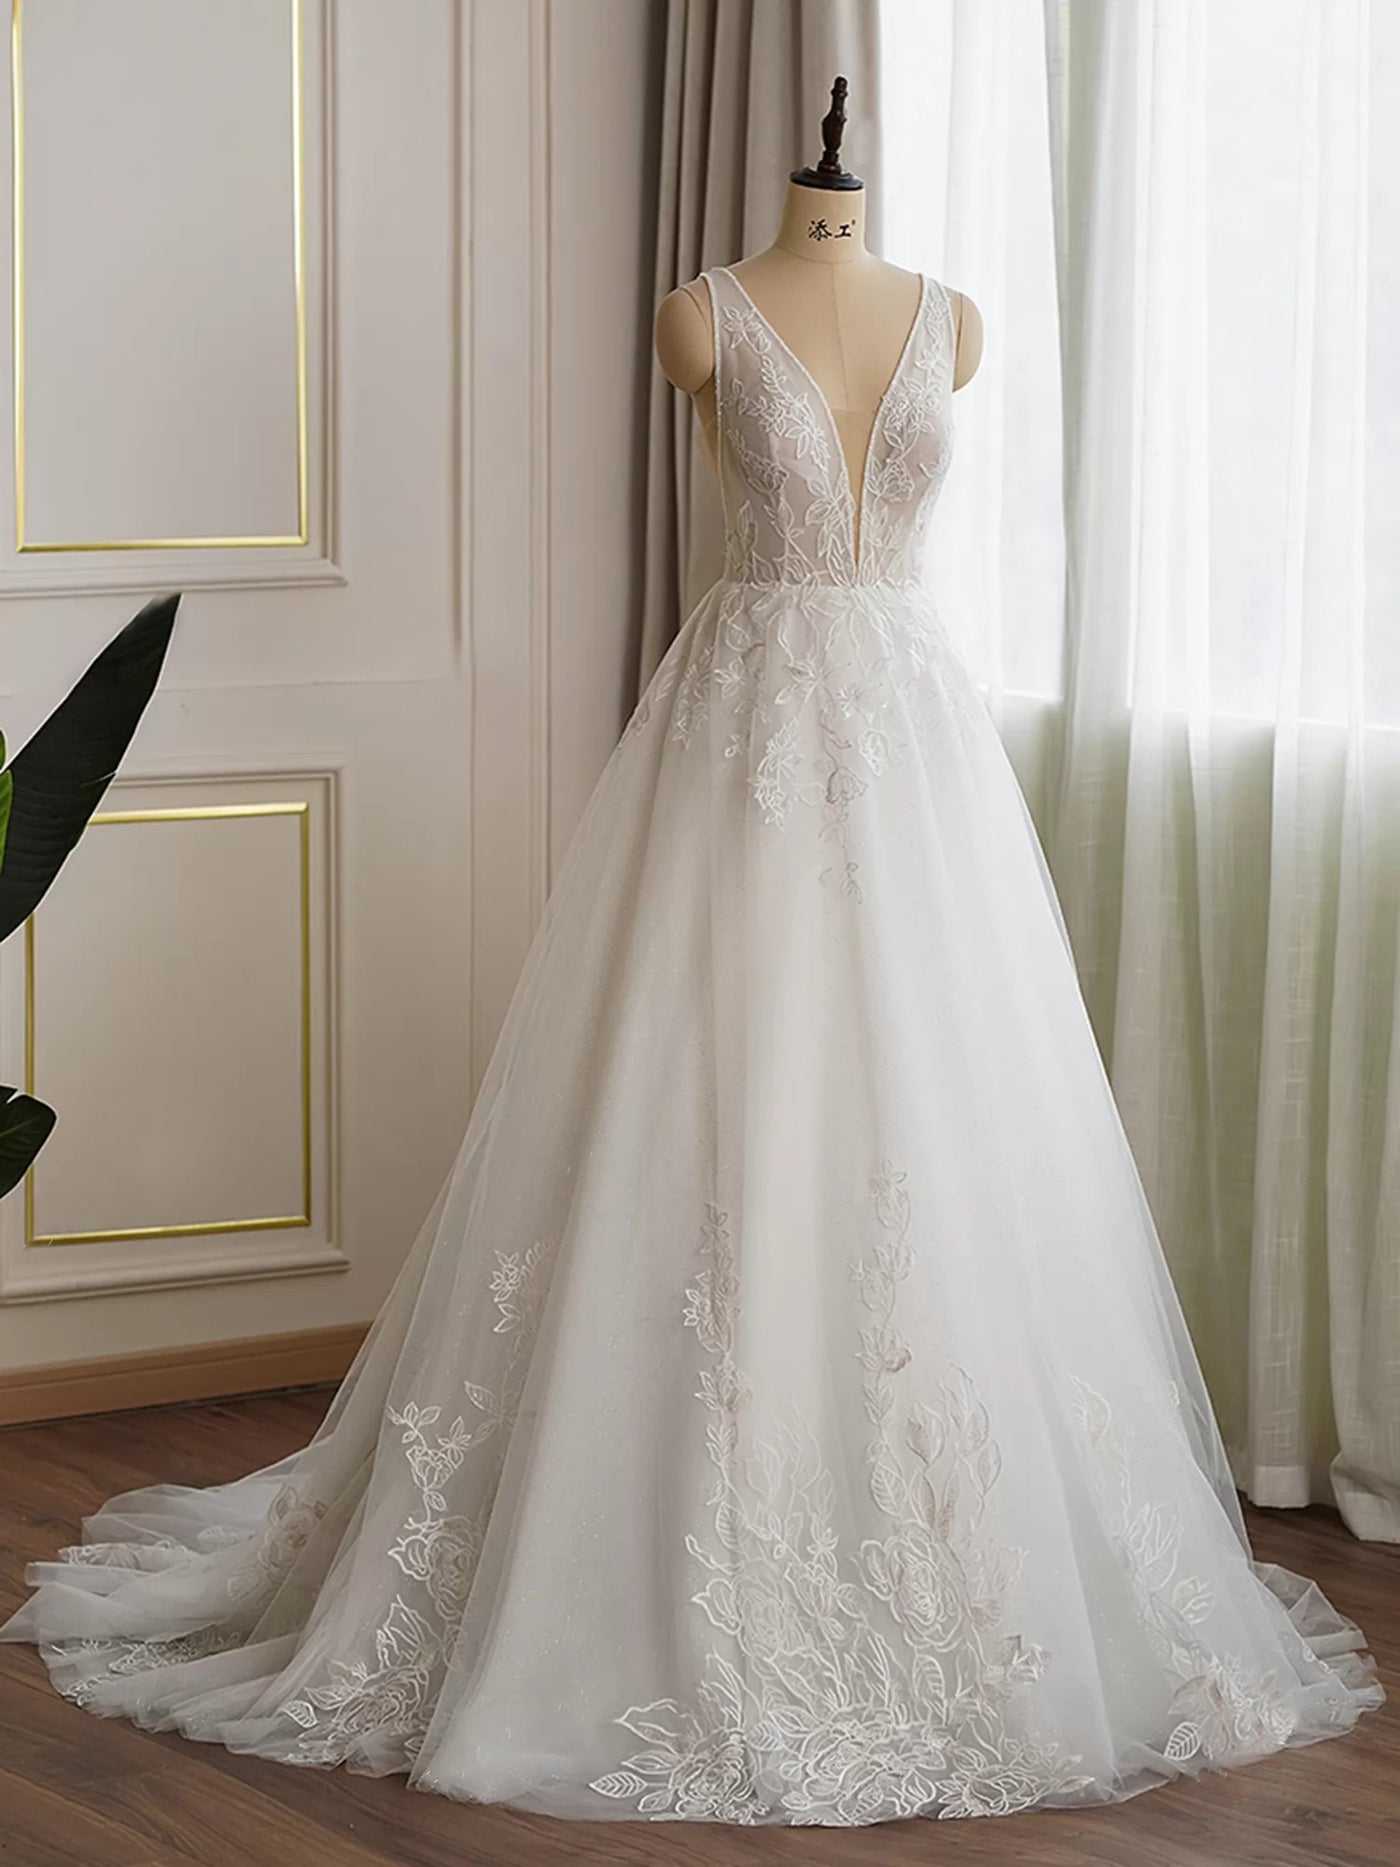 Plunging V Neckline Lace Ball Gown Bridal Dress